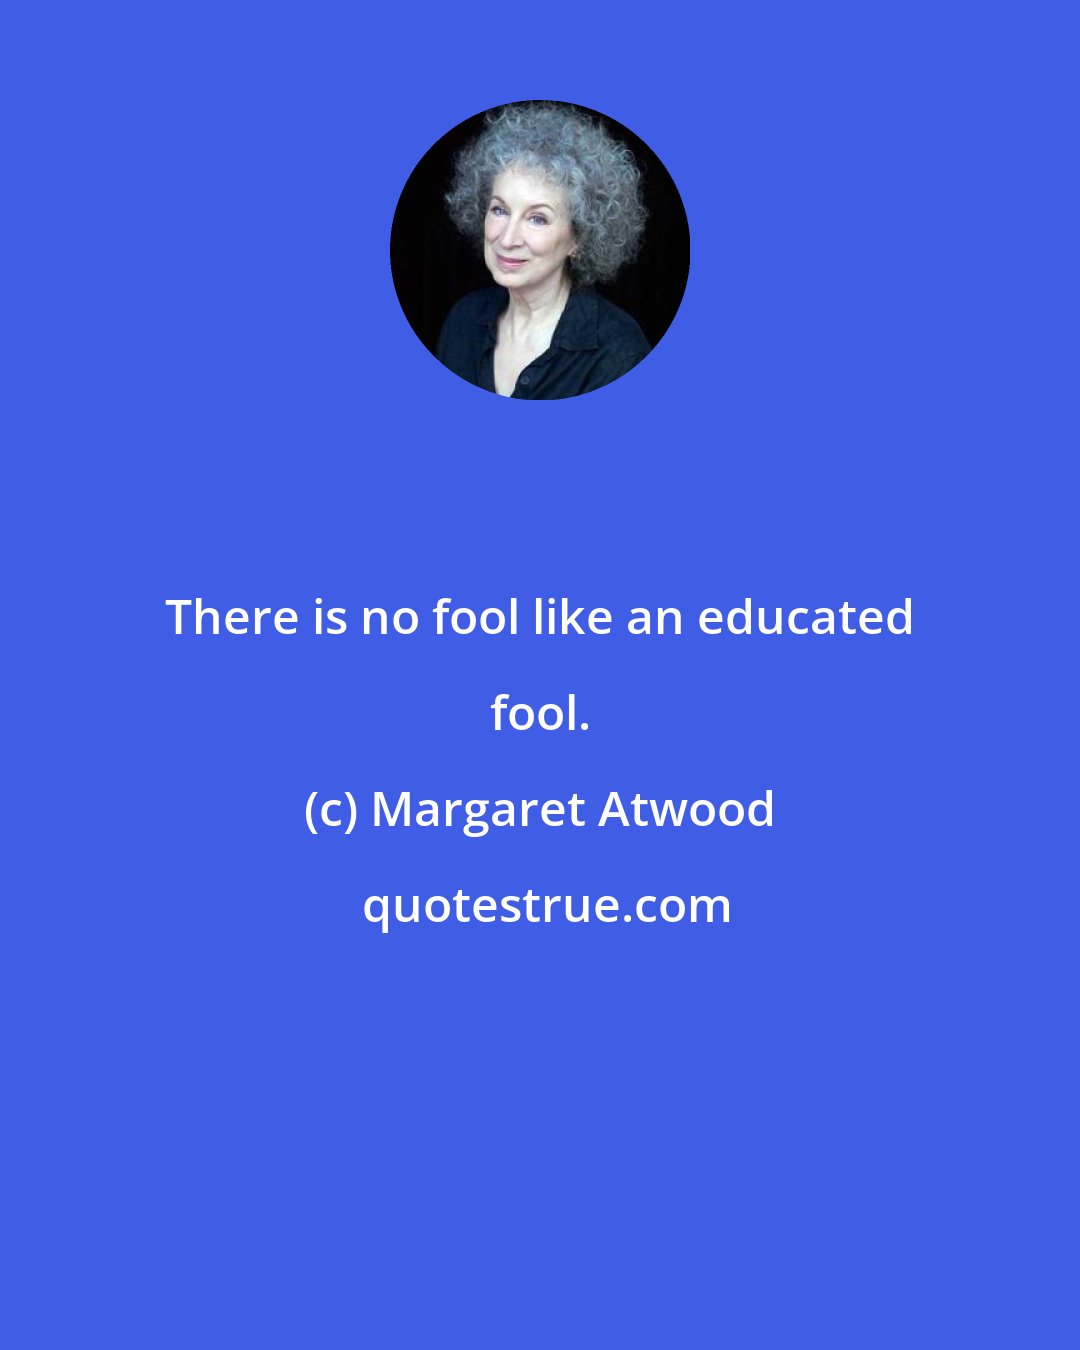 Margaret Atwood: There is no fool like an educated fool.